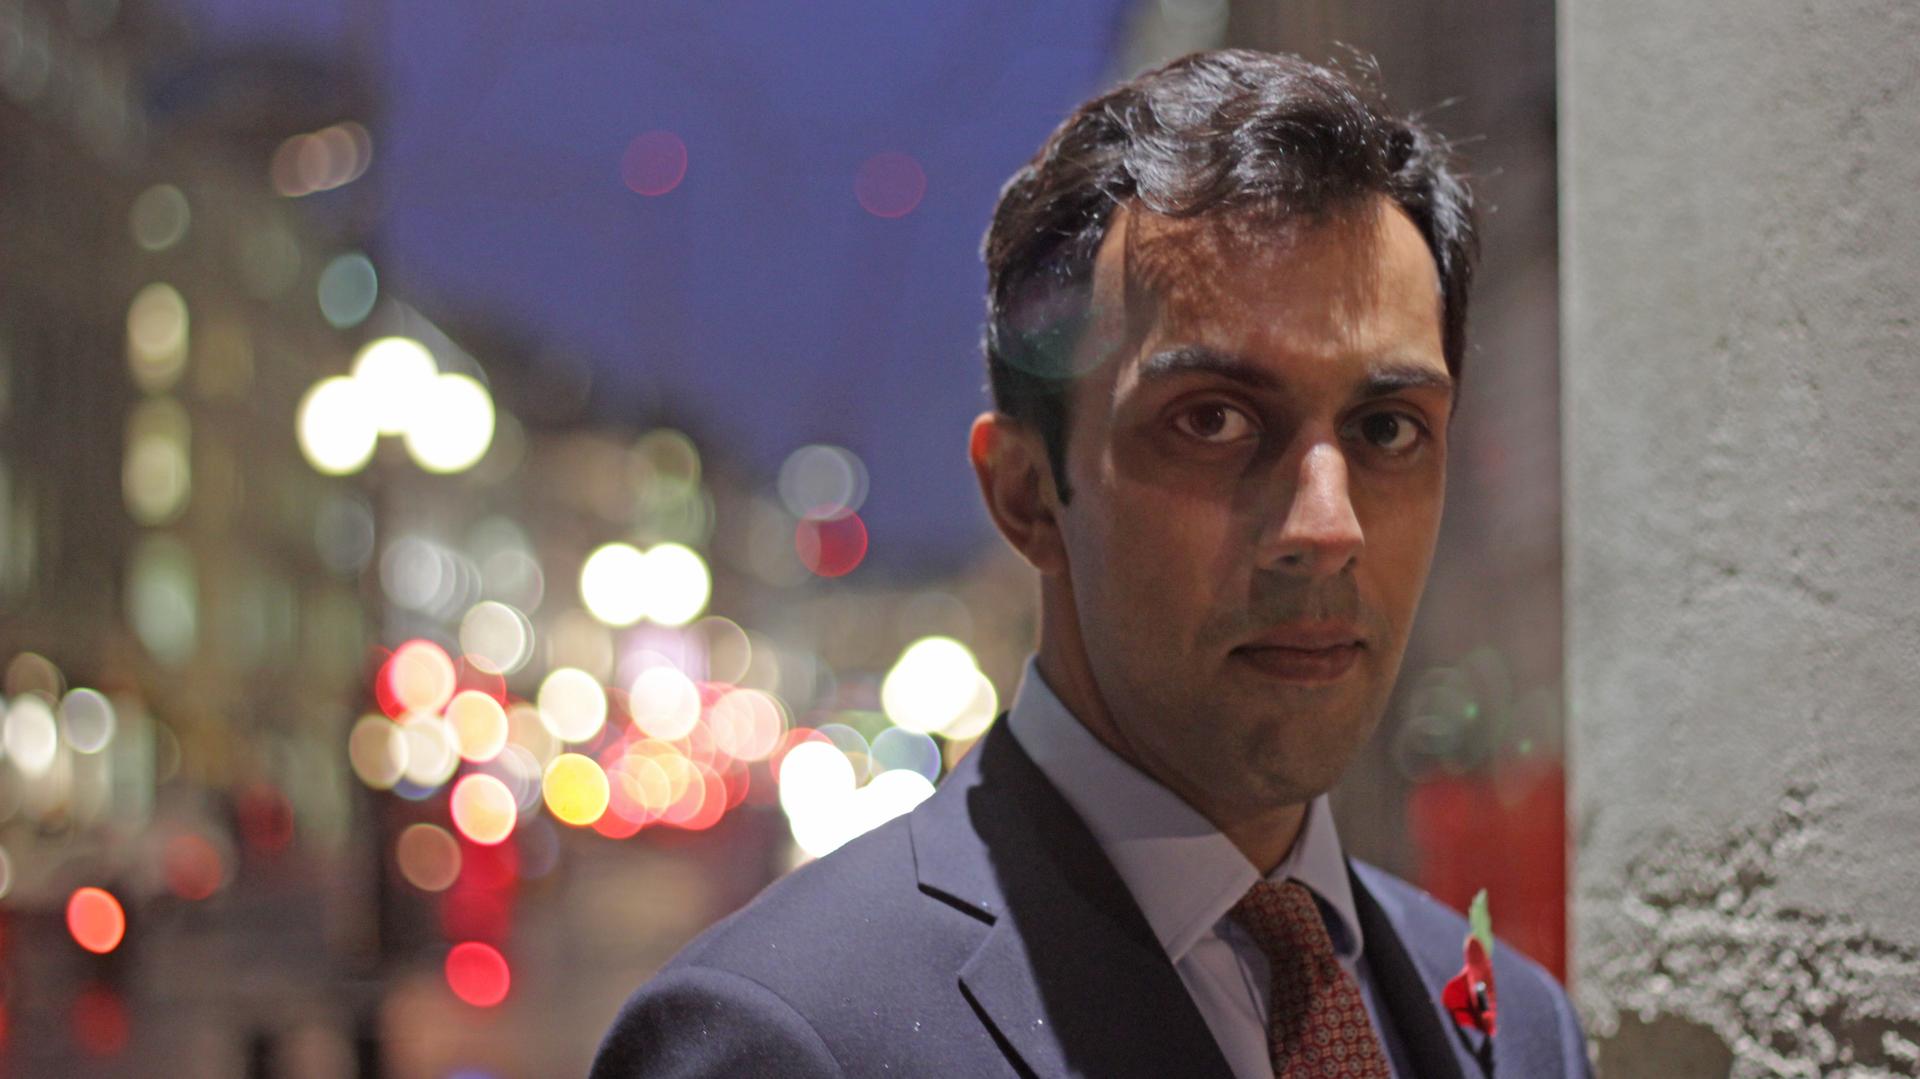 Waleed Ghani has announced he'll run for election in his south London district. He's officially registered with the Electoral Commission as the Whig Party candidate.